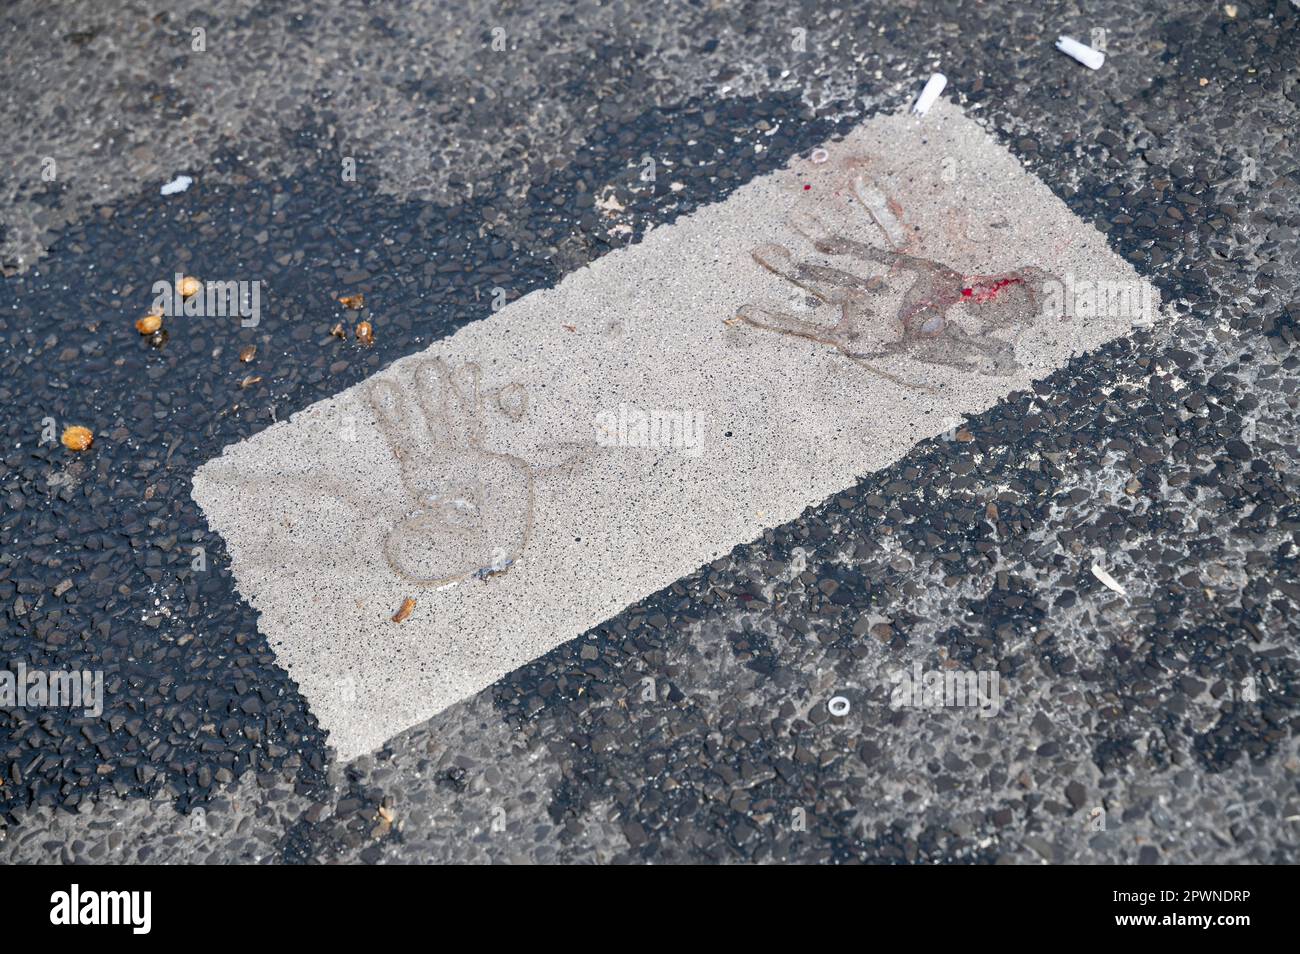 28.04.2023, Berlin, Germany, Europe - Imprints of hands, one with bloodstains, left by super glue on asphalt after Last Generation climate protest. Stock Photo